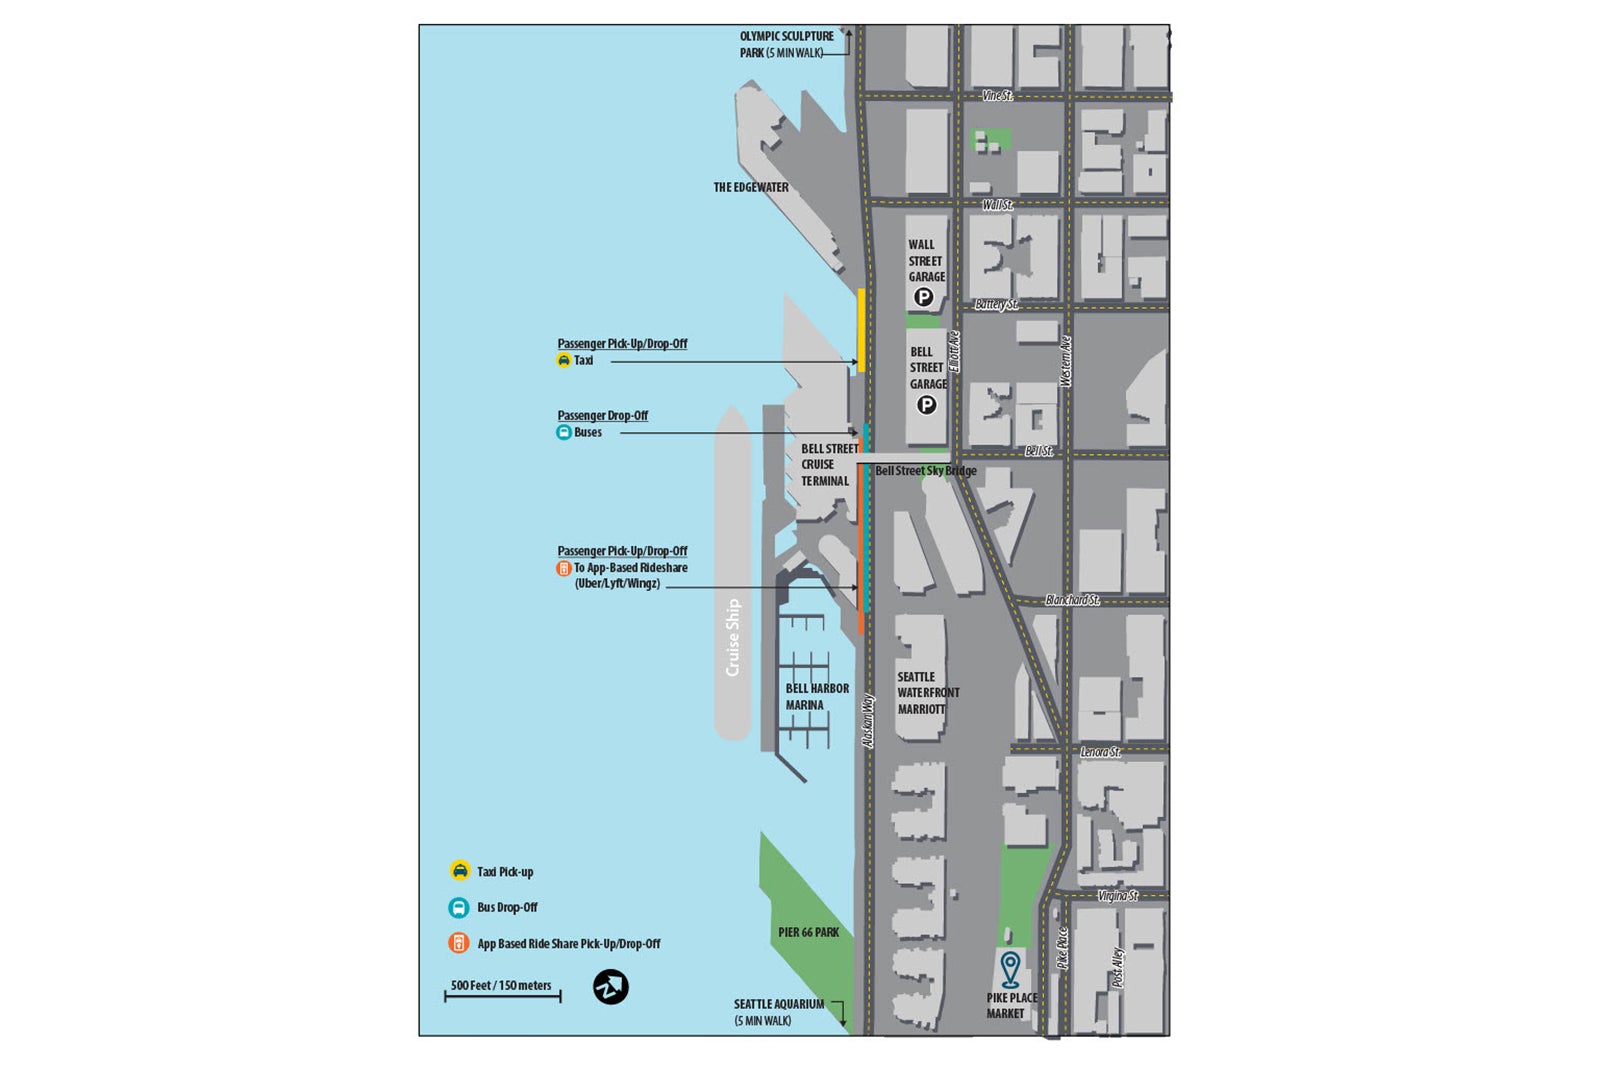 Map of Seattle's Bell Harbor cruise terminal